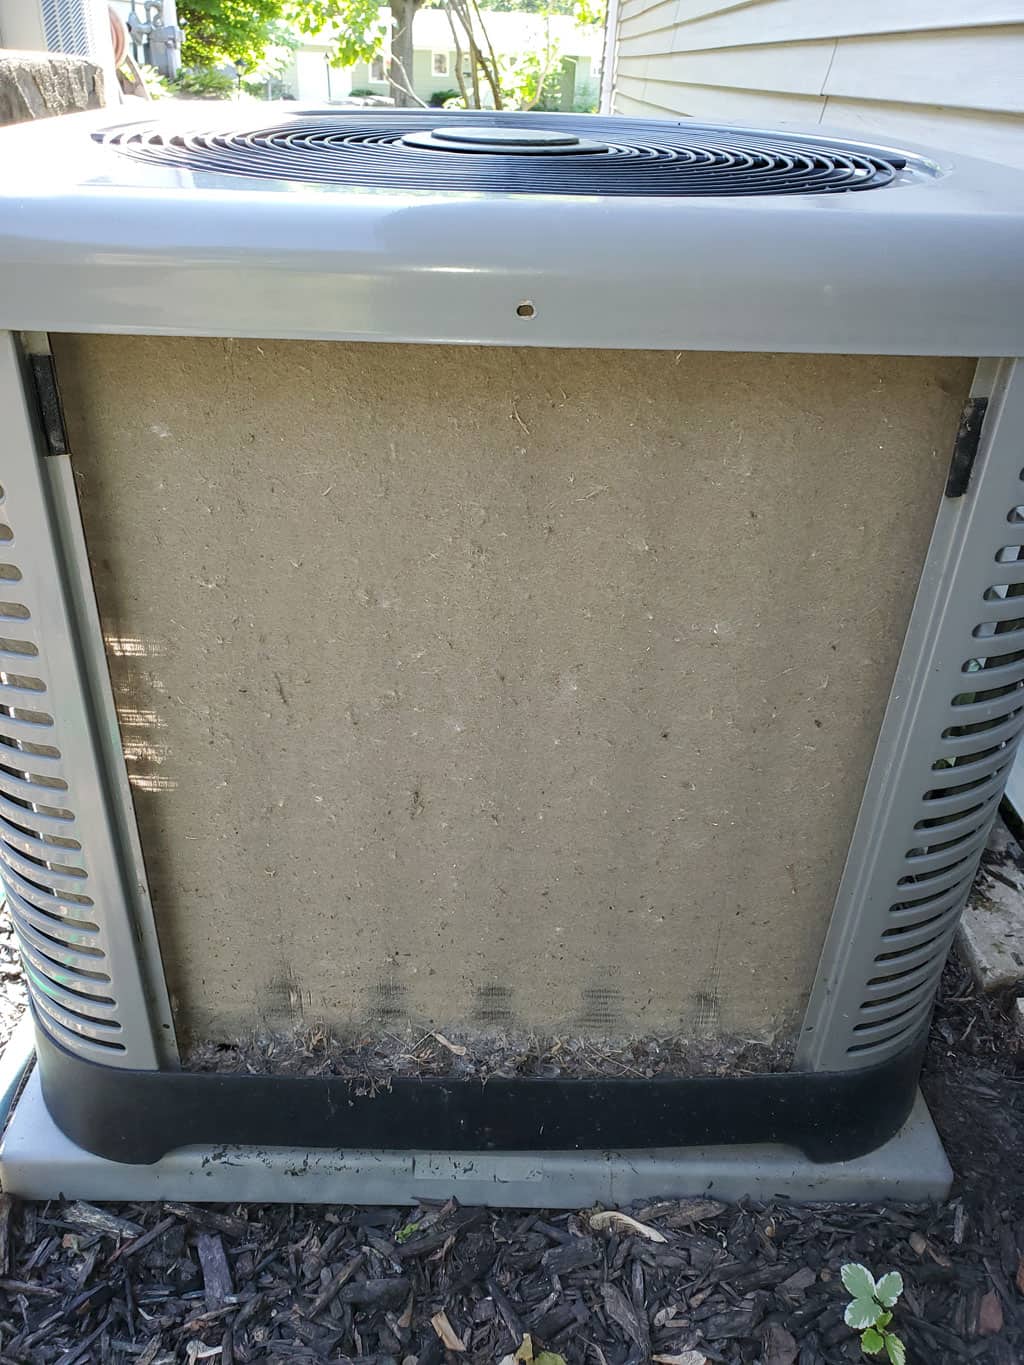 A dirty air conditioner.